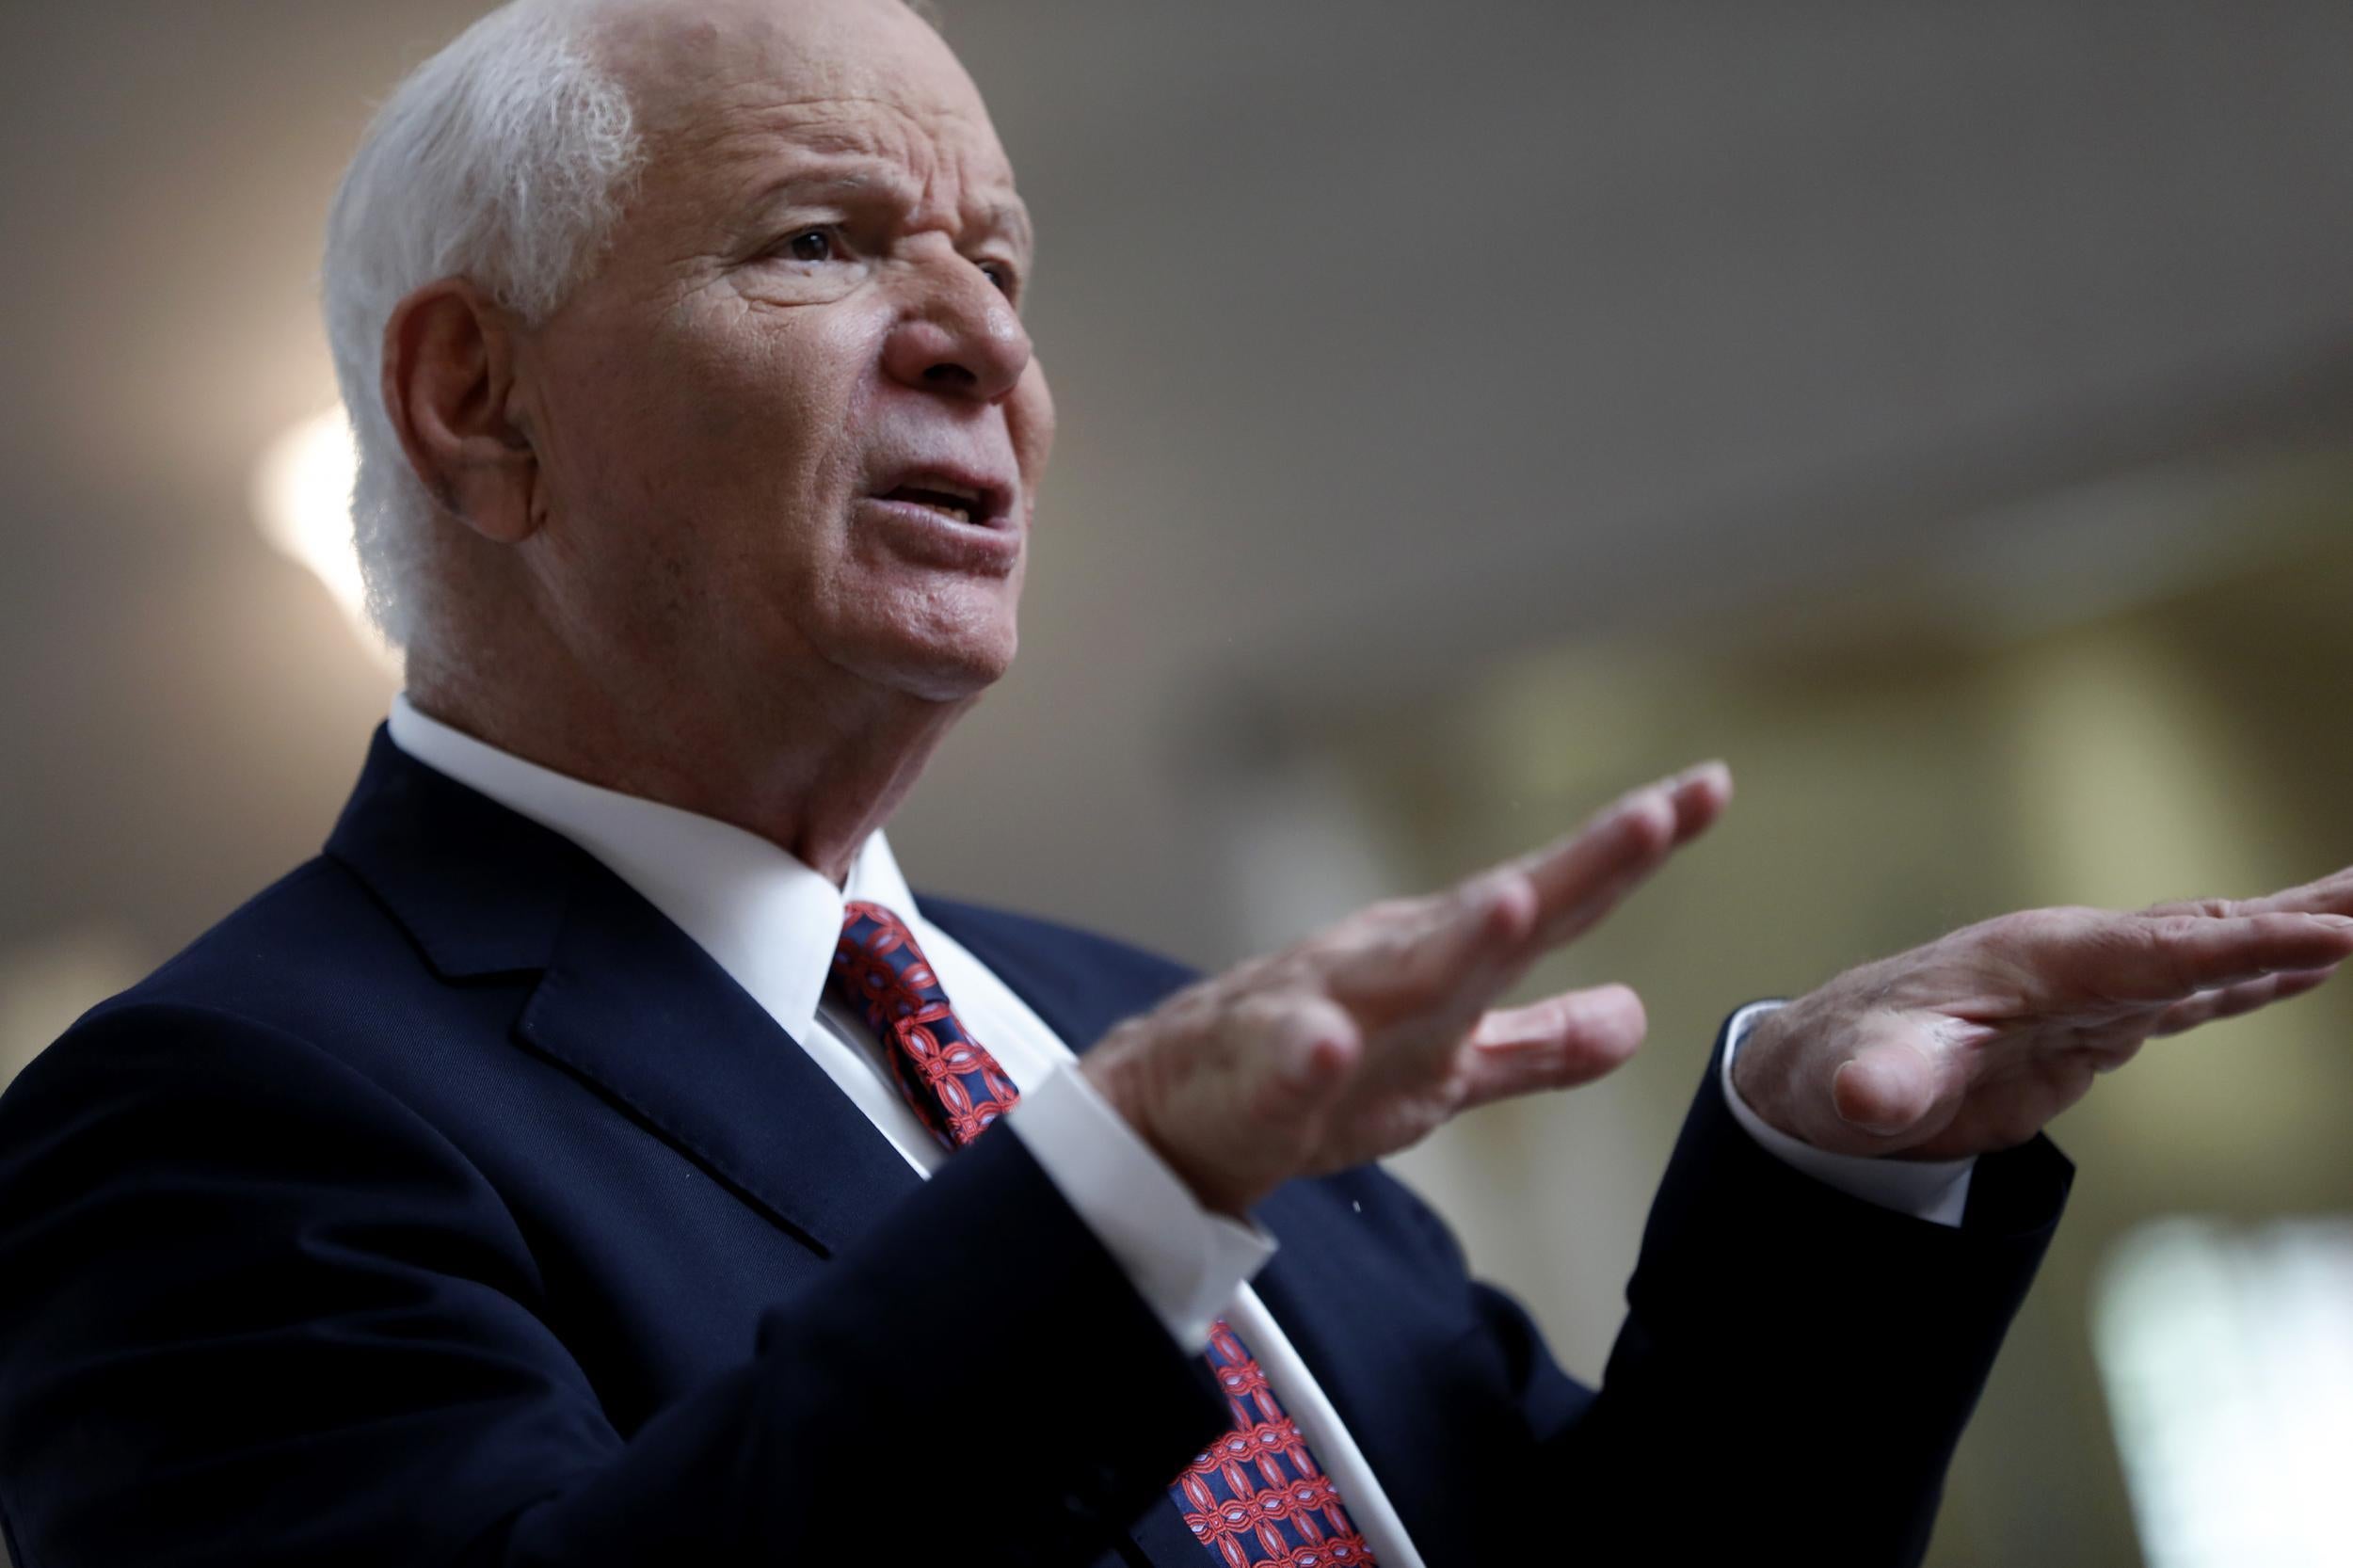 Senator Ben Cardin has proposed fining Americans who support boycotts of Israel